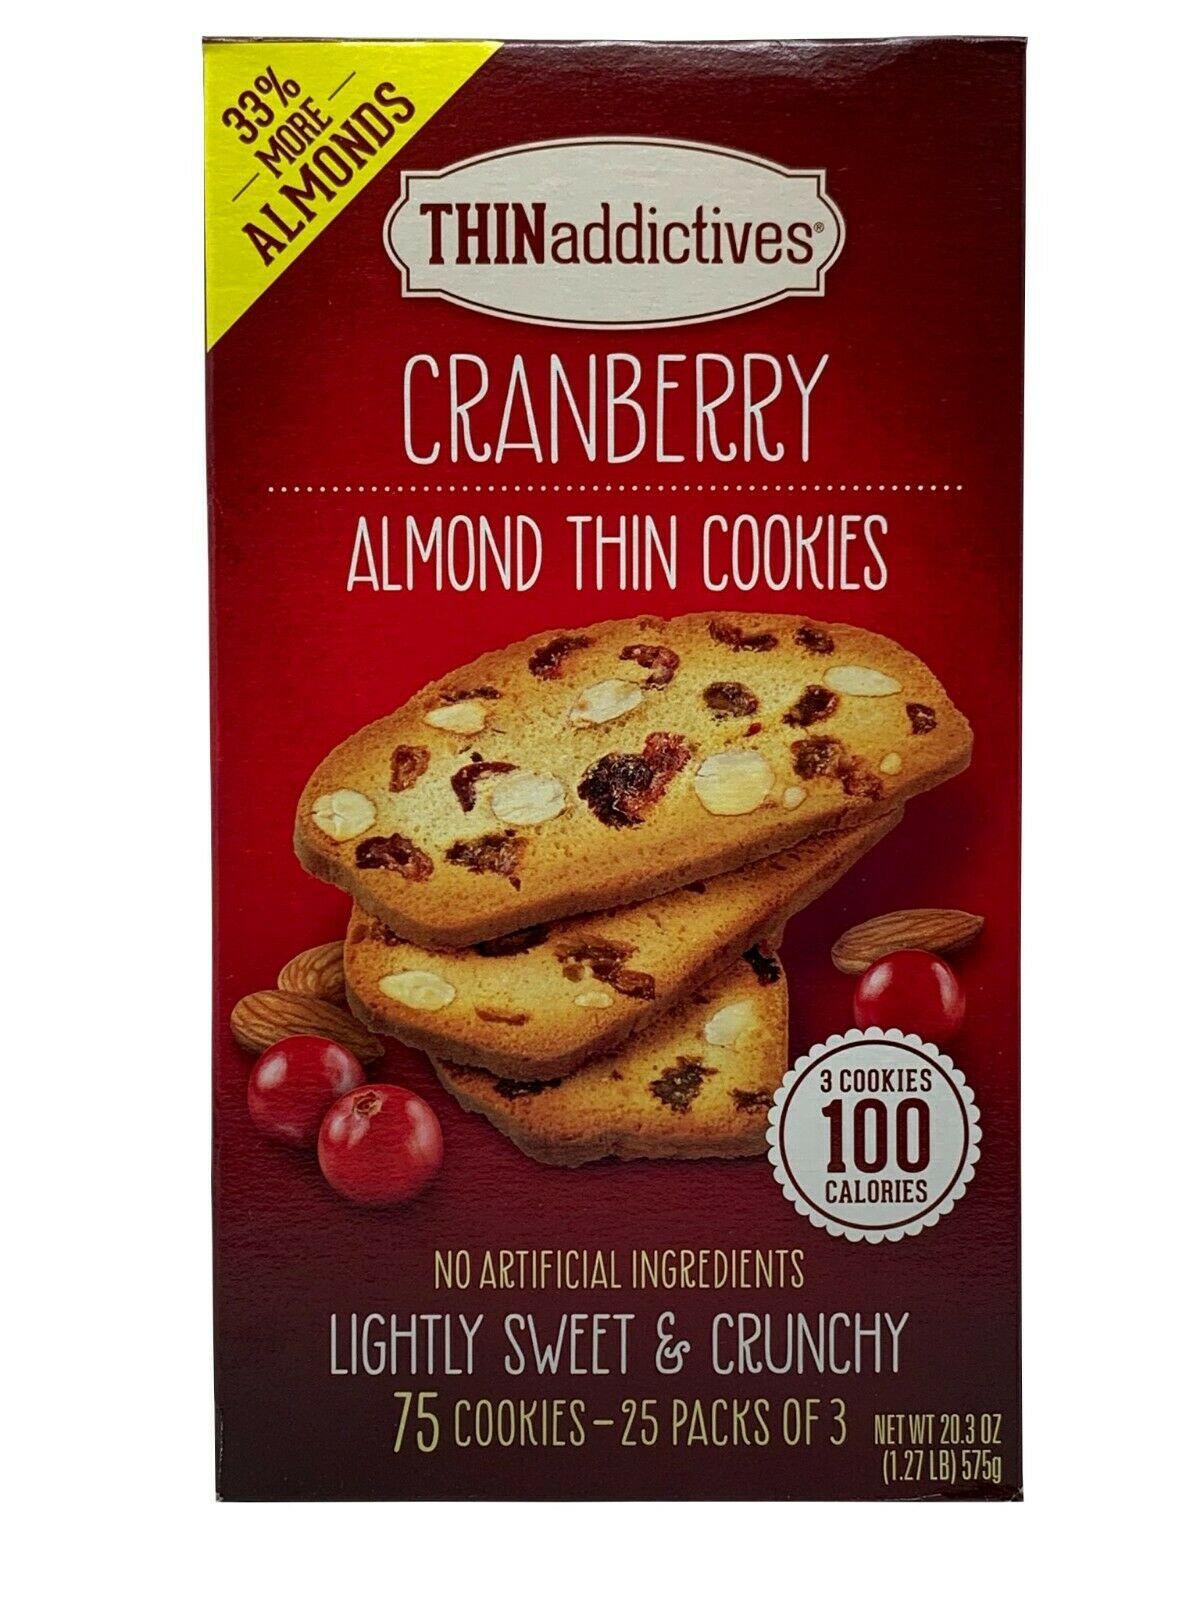 Thin Addictives Lightly Sweet & Crunchy Cranberry Almond Thins 25 Packs 1.27 Lb